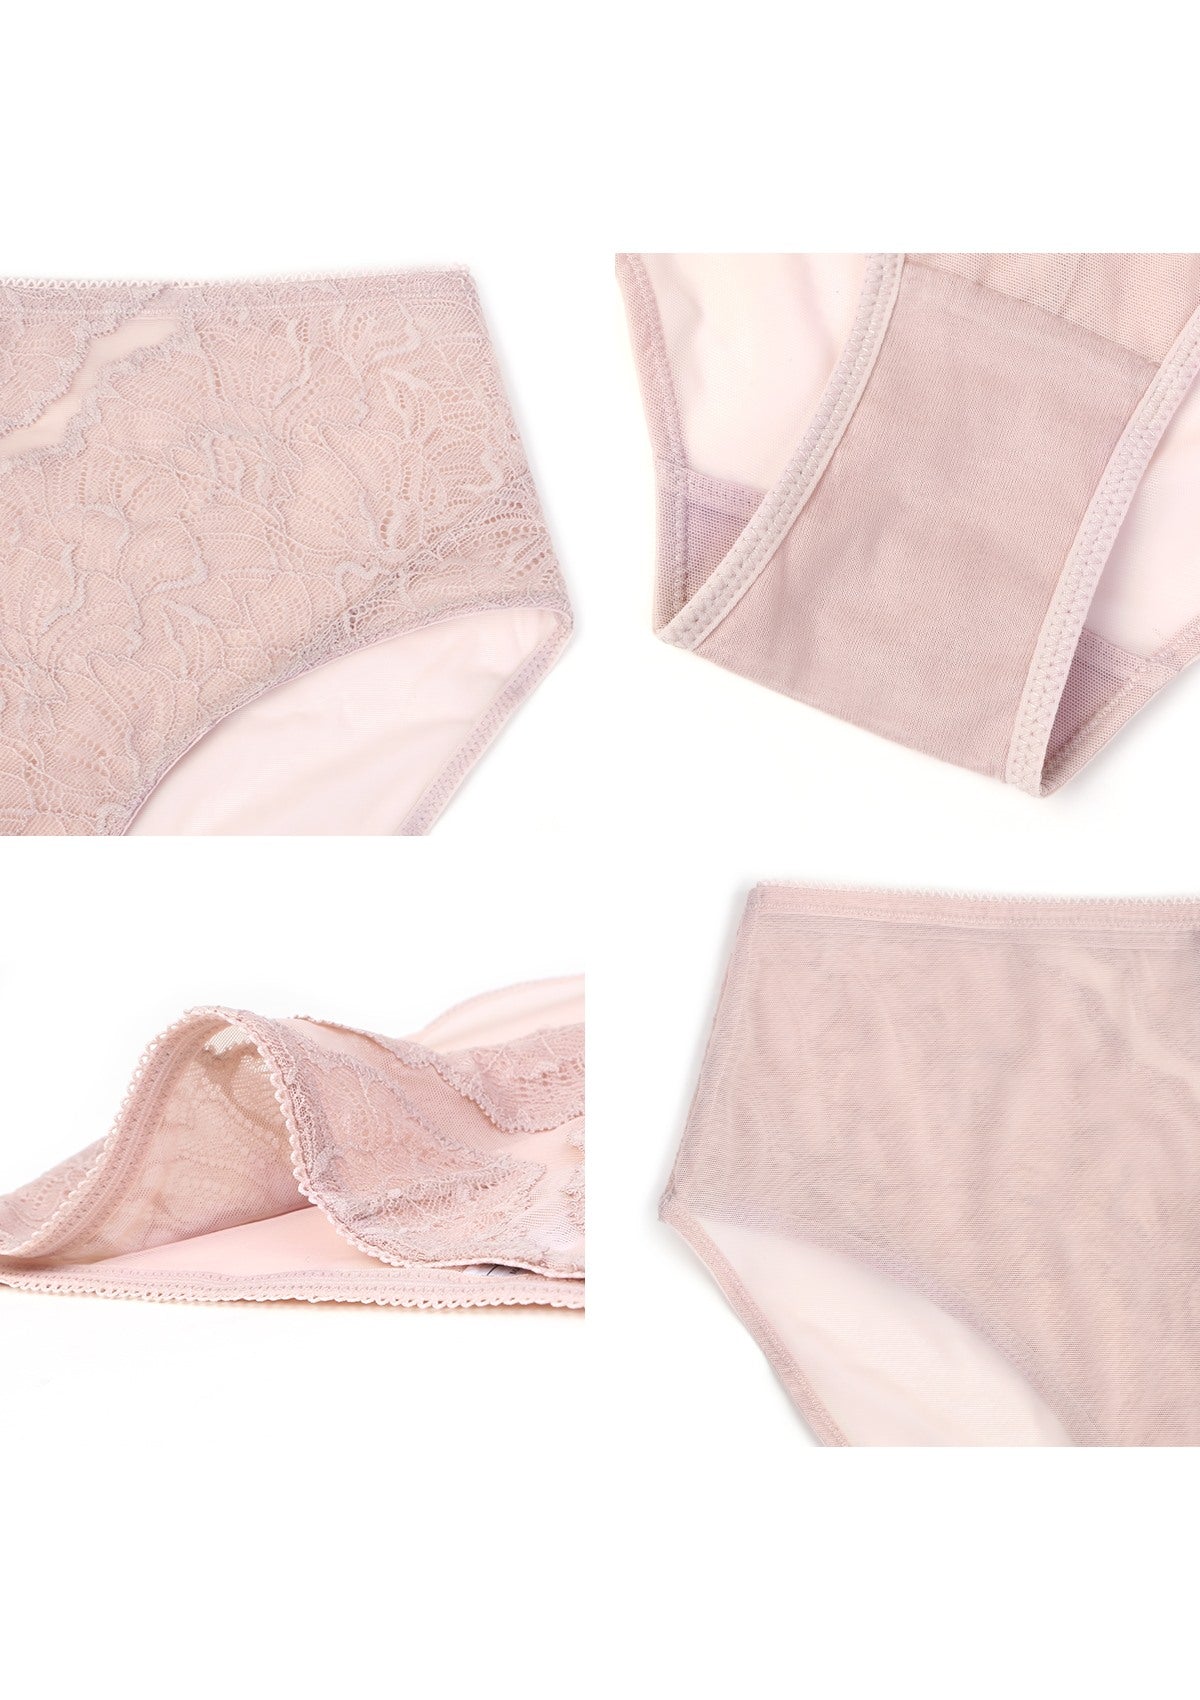 HSIA Blossom High-Rise Floral Lacy Panty-Comfort In Style - XL / Dark Pink